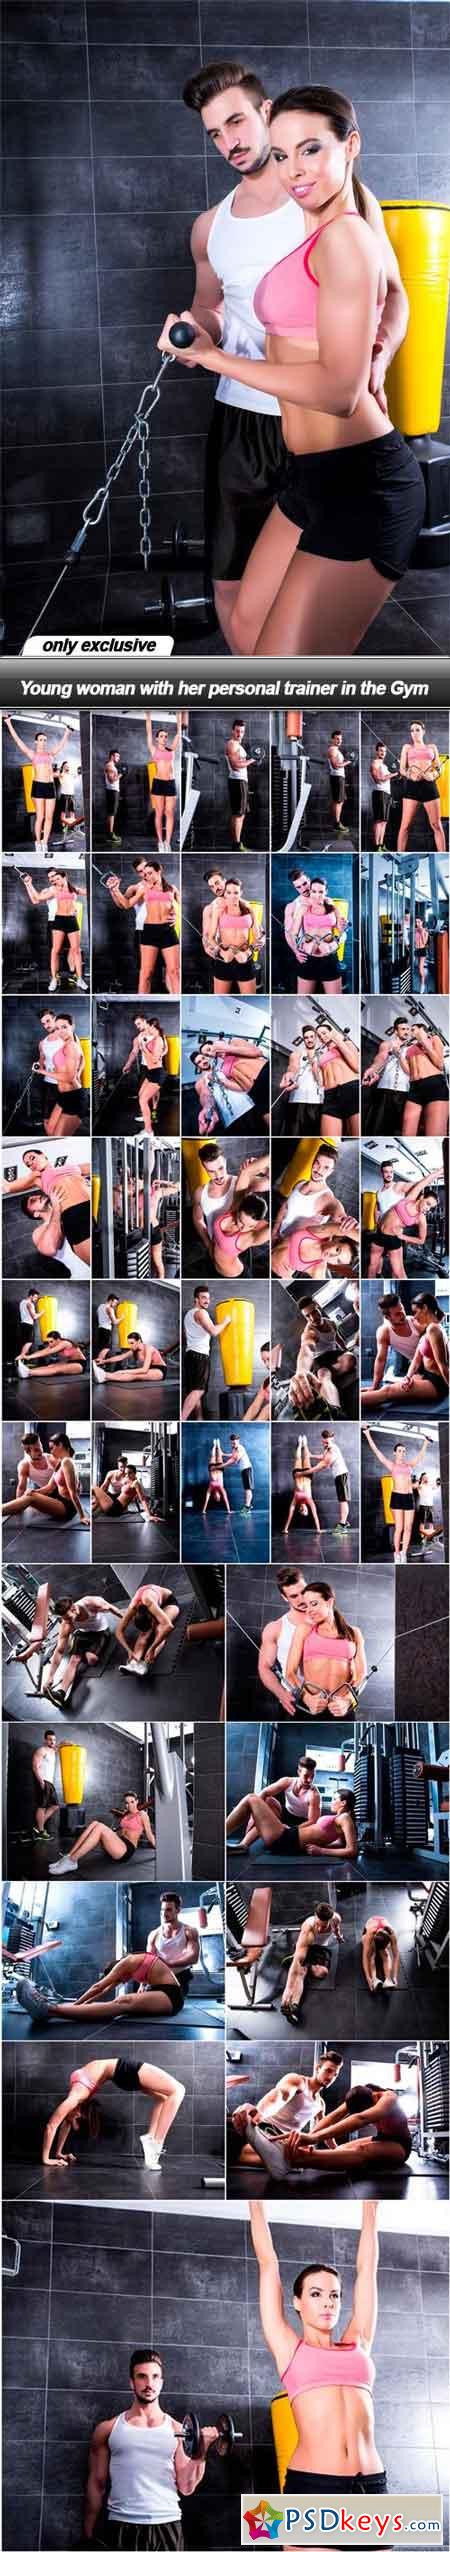 Young woman with her personal trainer in the Gym - 38 UHQ JPEG